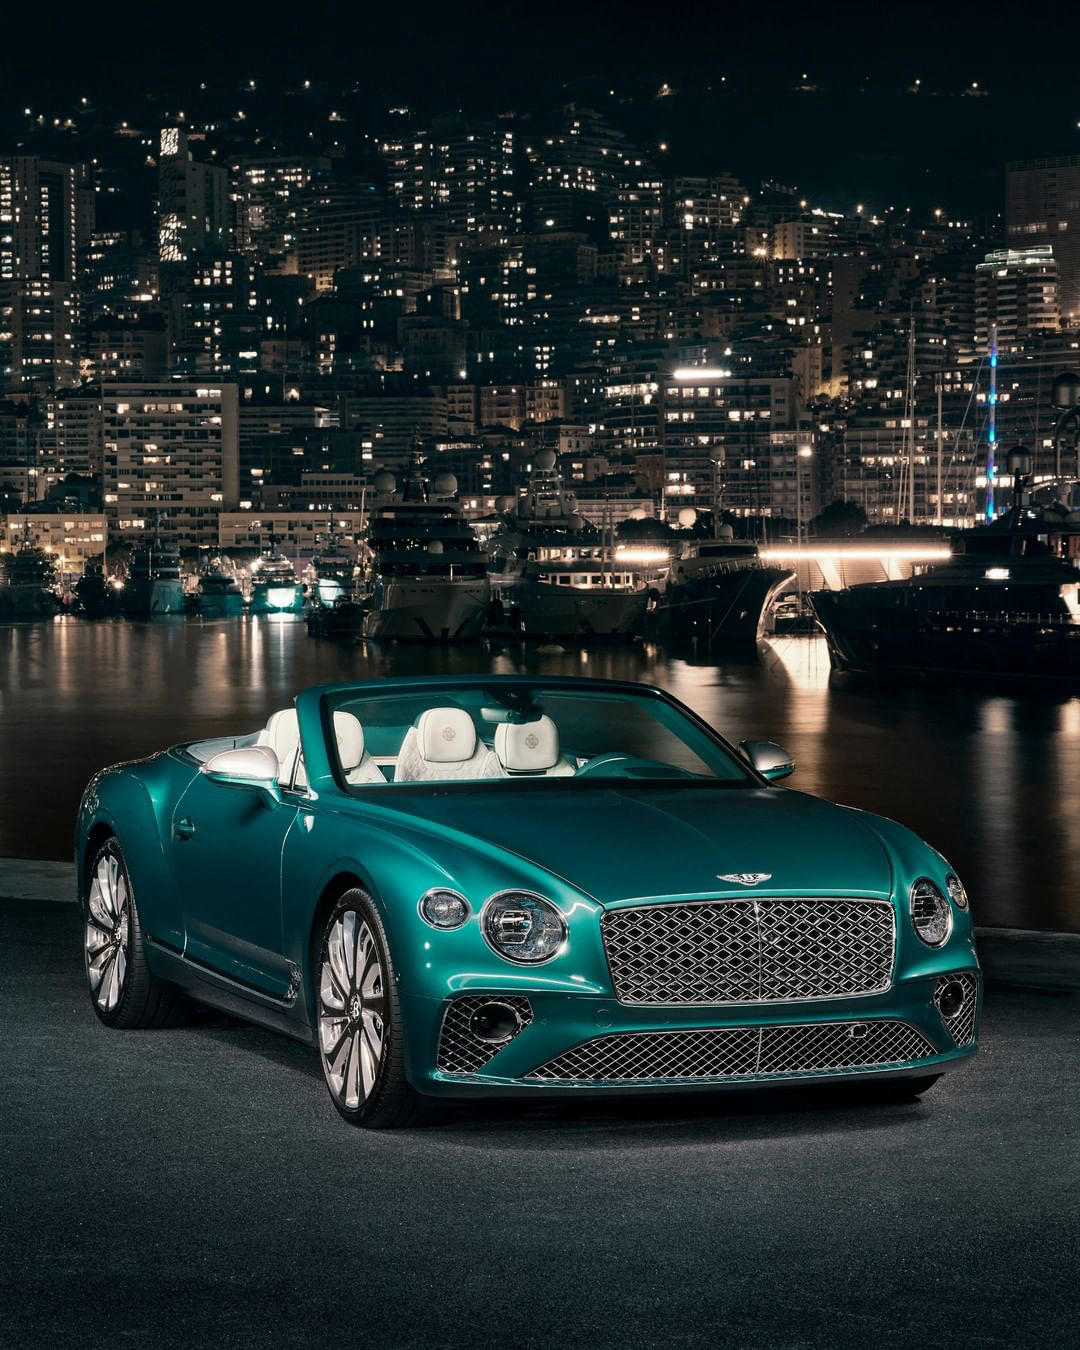 Bentley Motors - Shifting the tides of luxury mobility